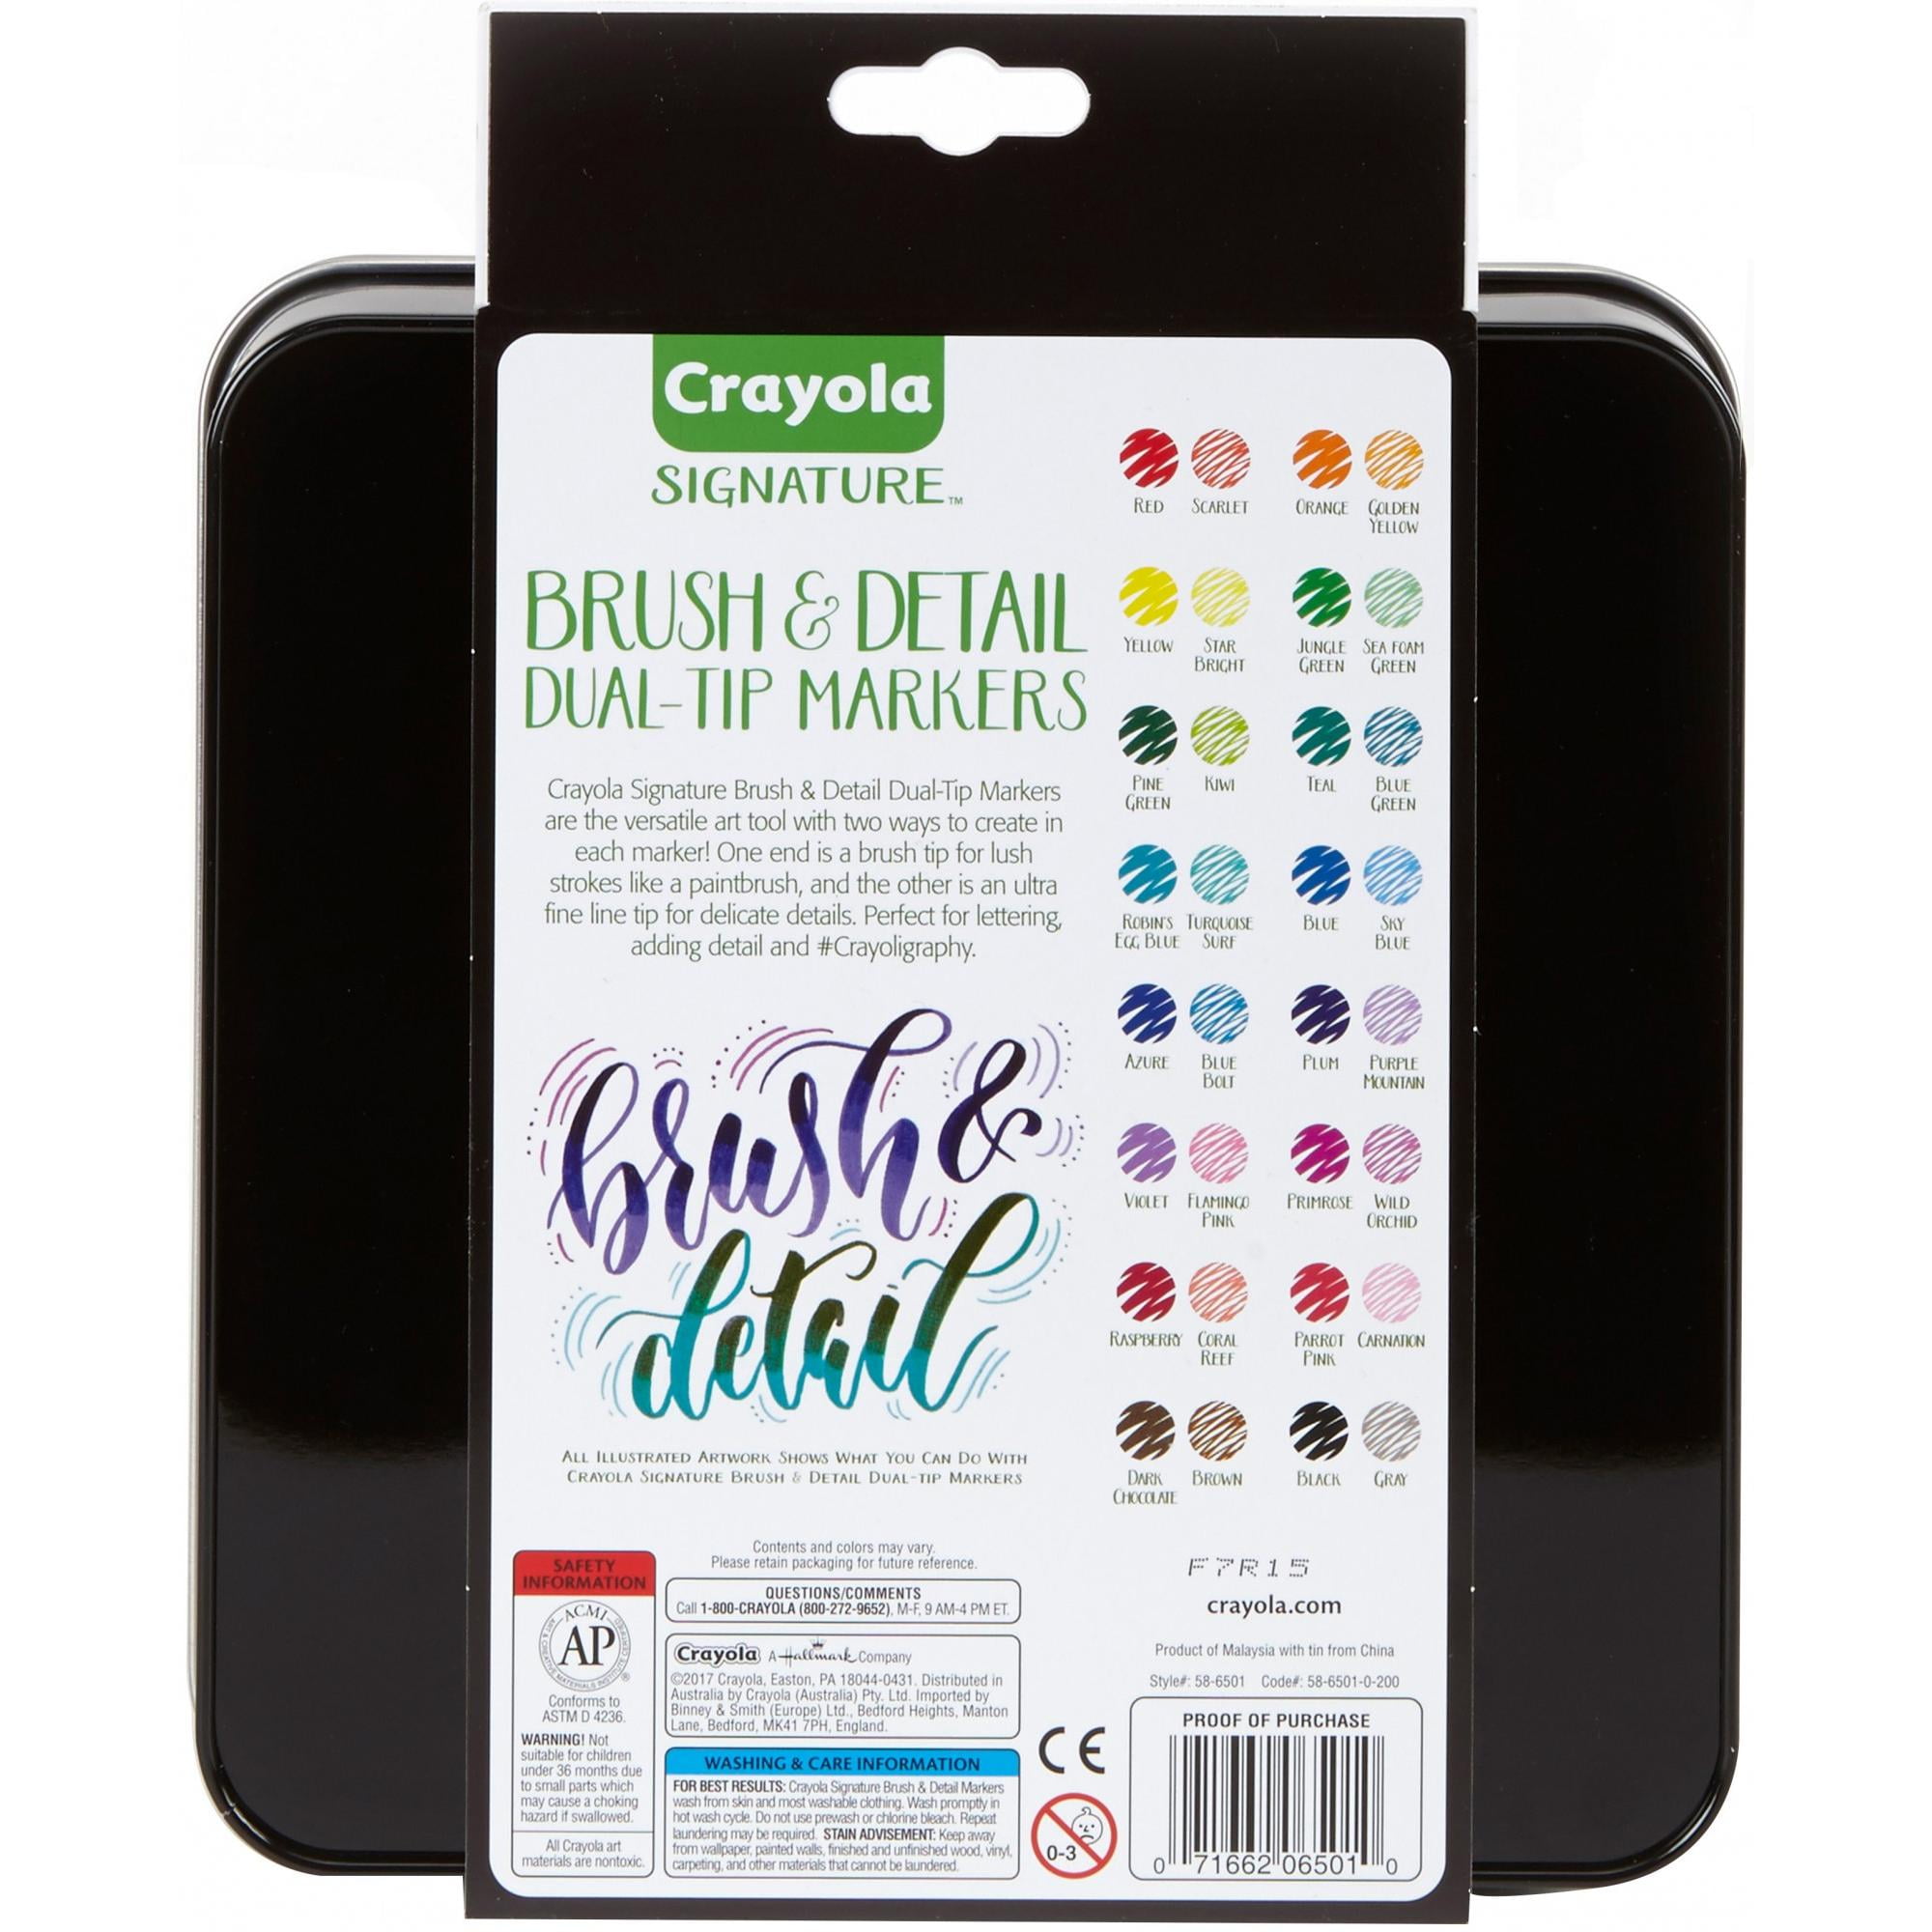 Review: Crayola Brush & Detail Markers – Pretty Prints & Paper